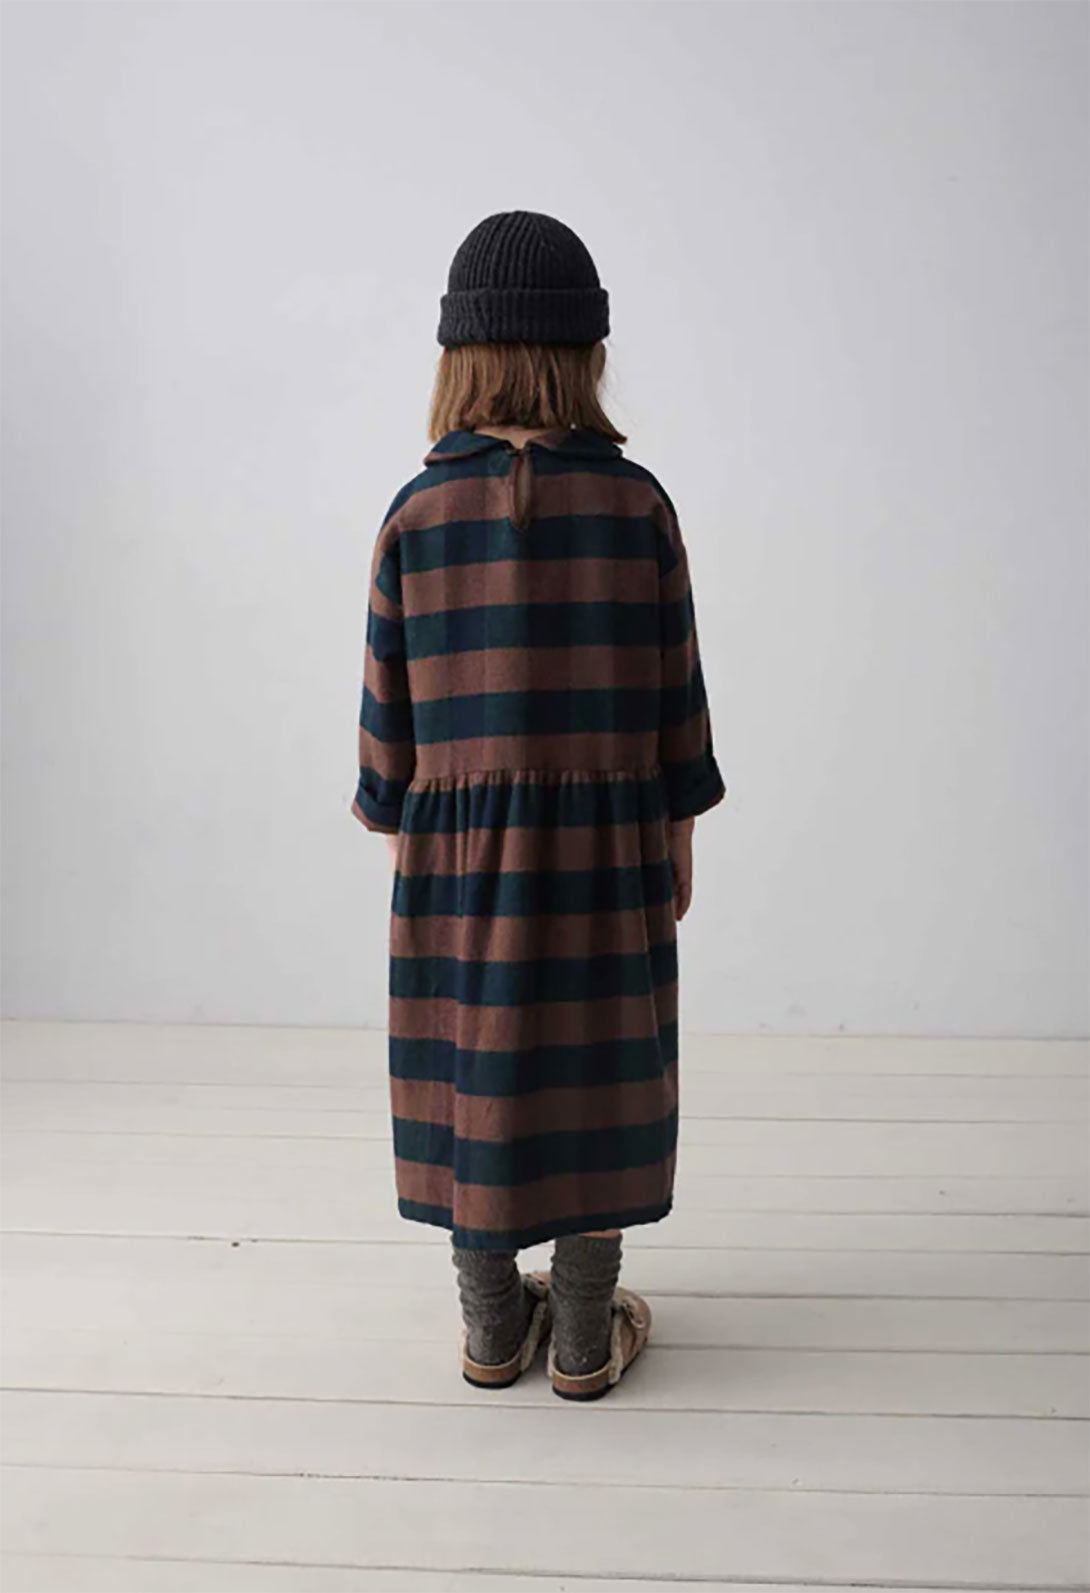 【Coucoubébé-baby】【40％off】my little cozmo  /  Organic plaid dress /  UNIQUE  /  チェック丸襟ワンピース  | Coucoubebe/ククベベ